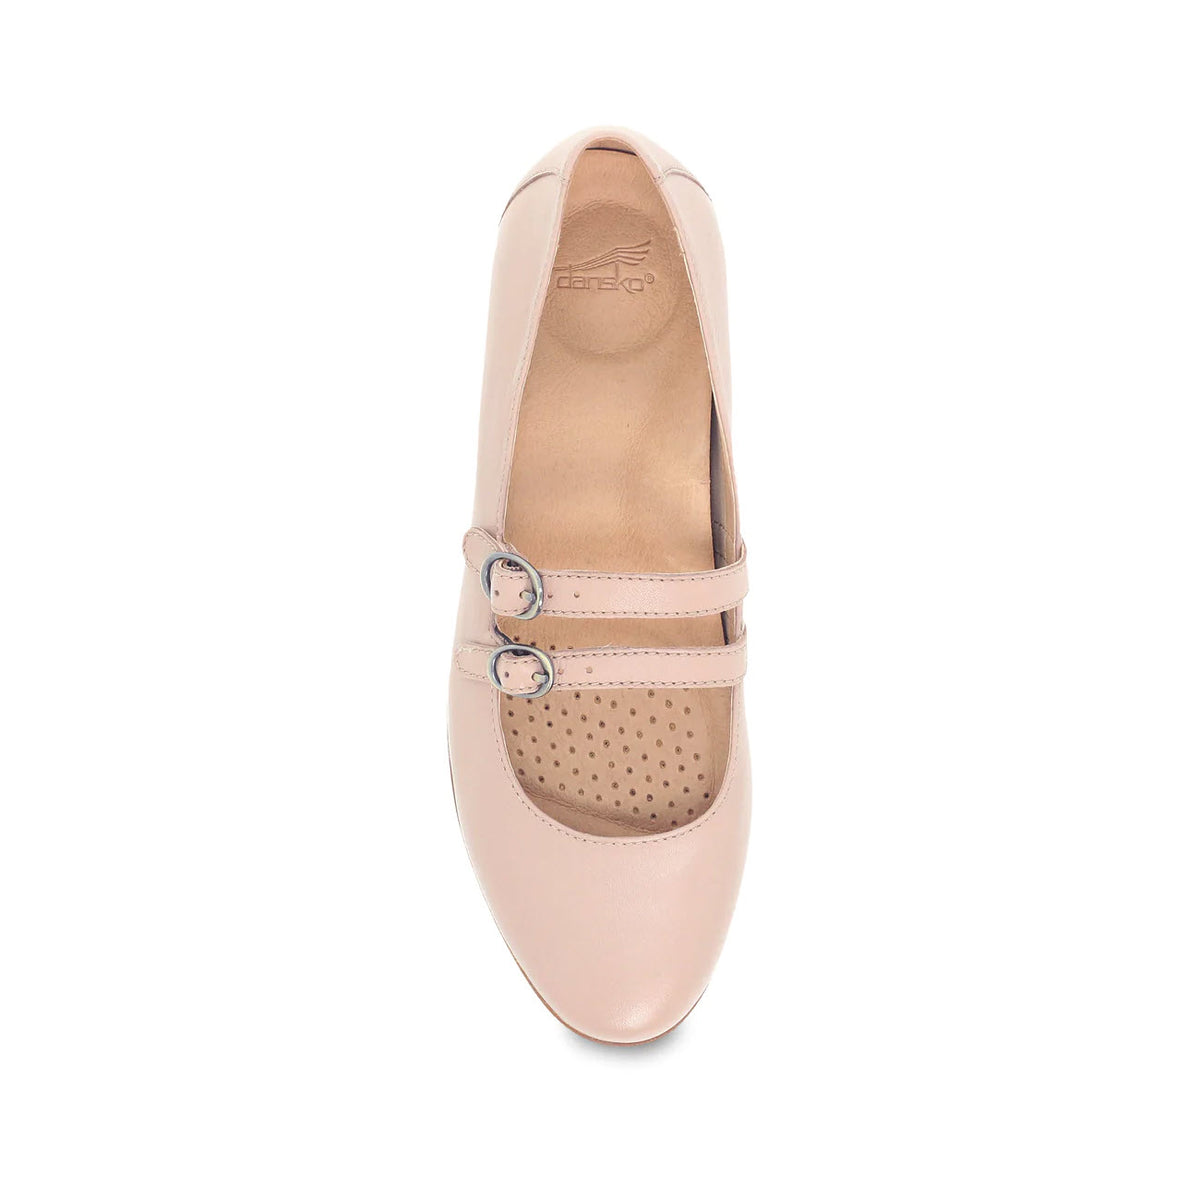 A single beige Dansko Leeza ballet shoe with a round toe and adjustable straps, viewed from the top on a white background.